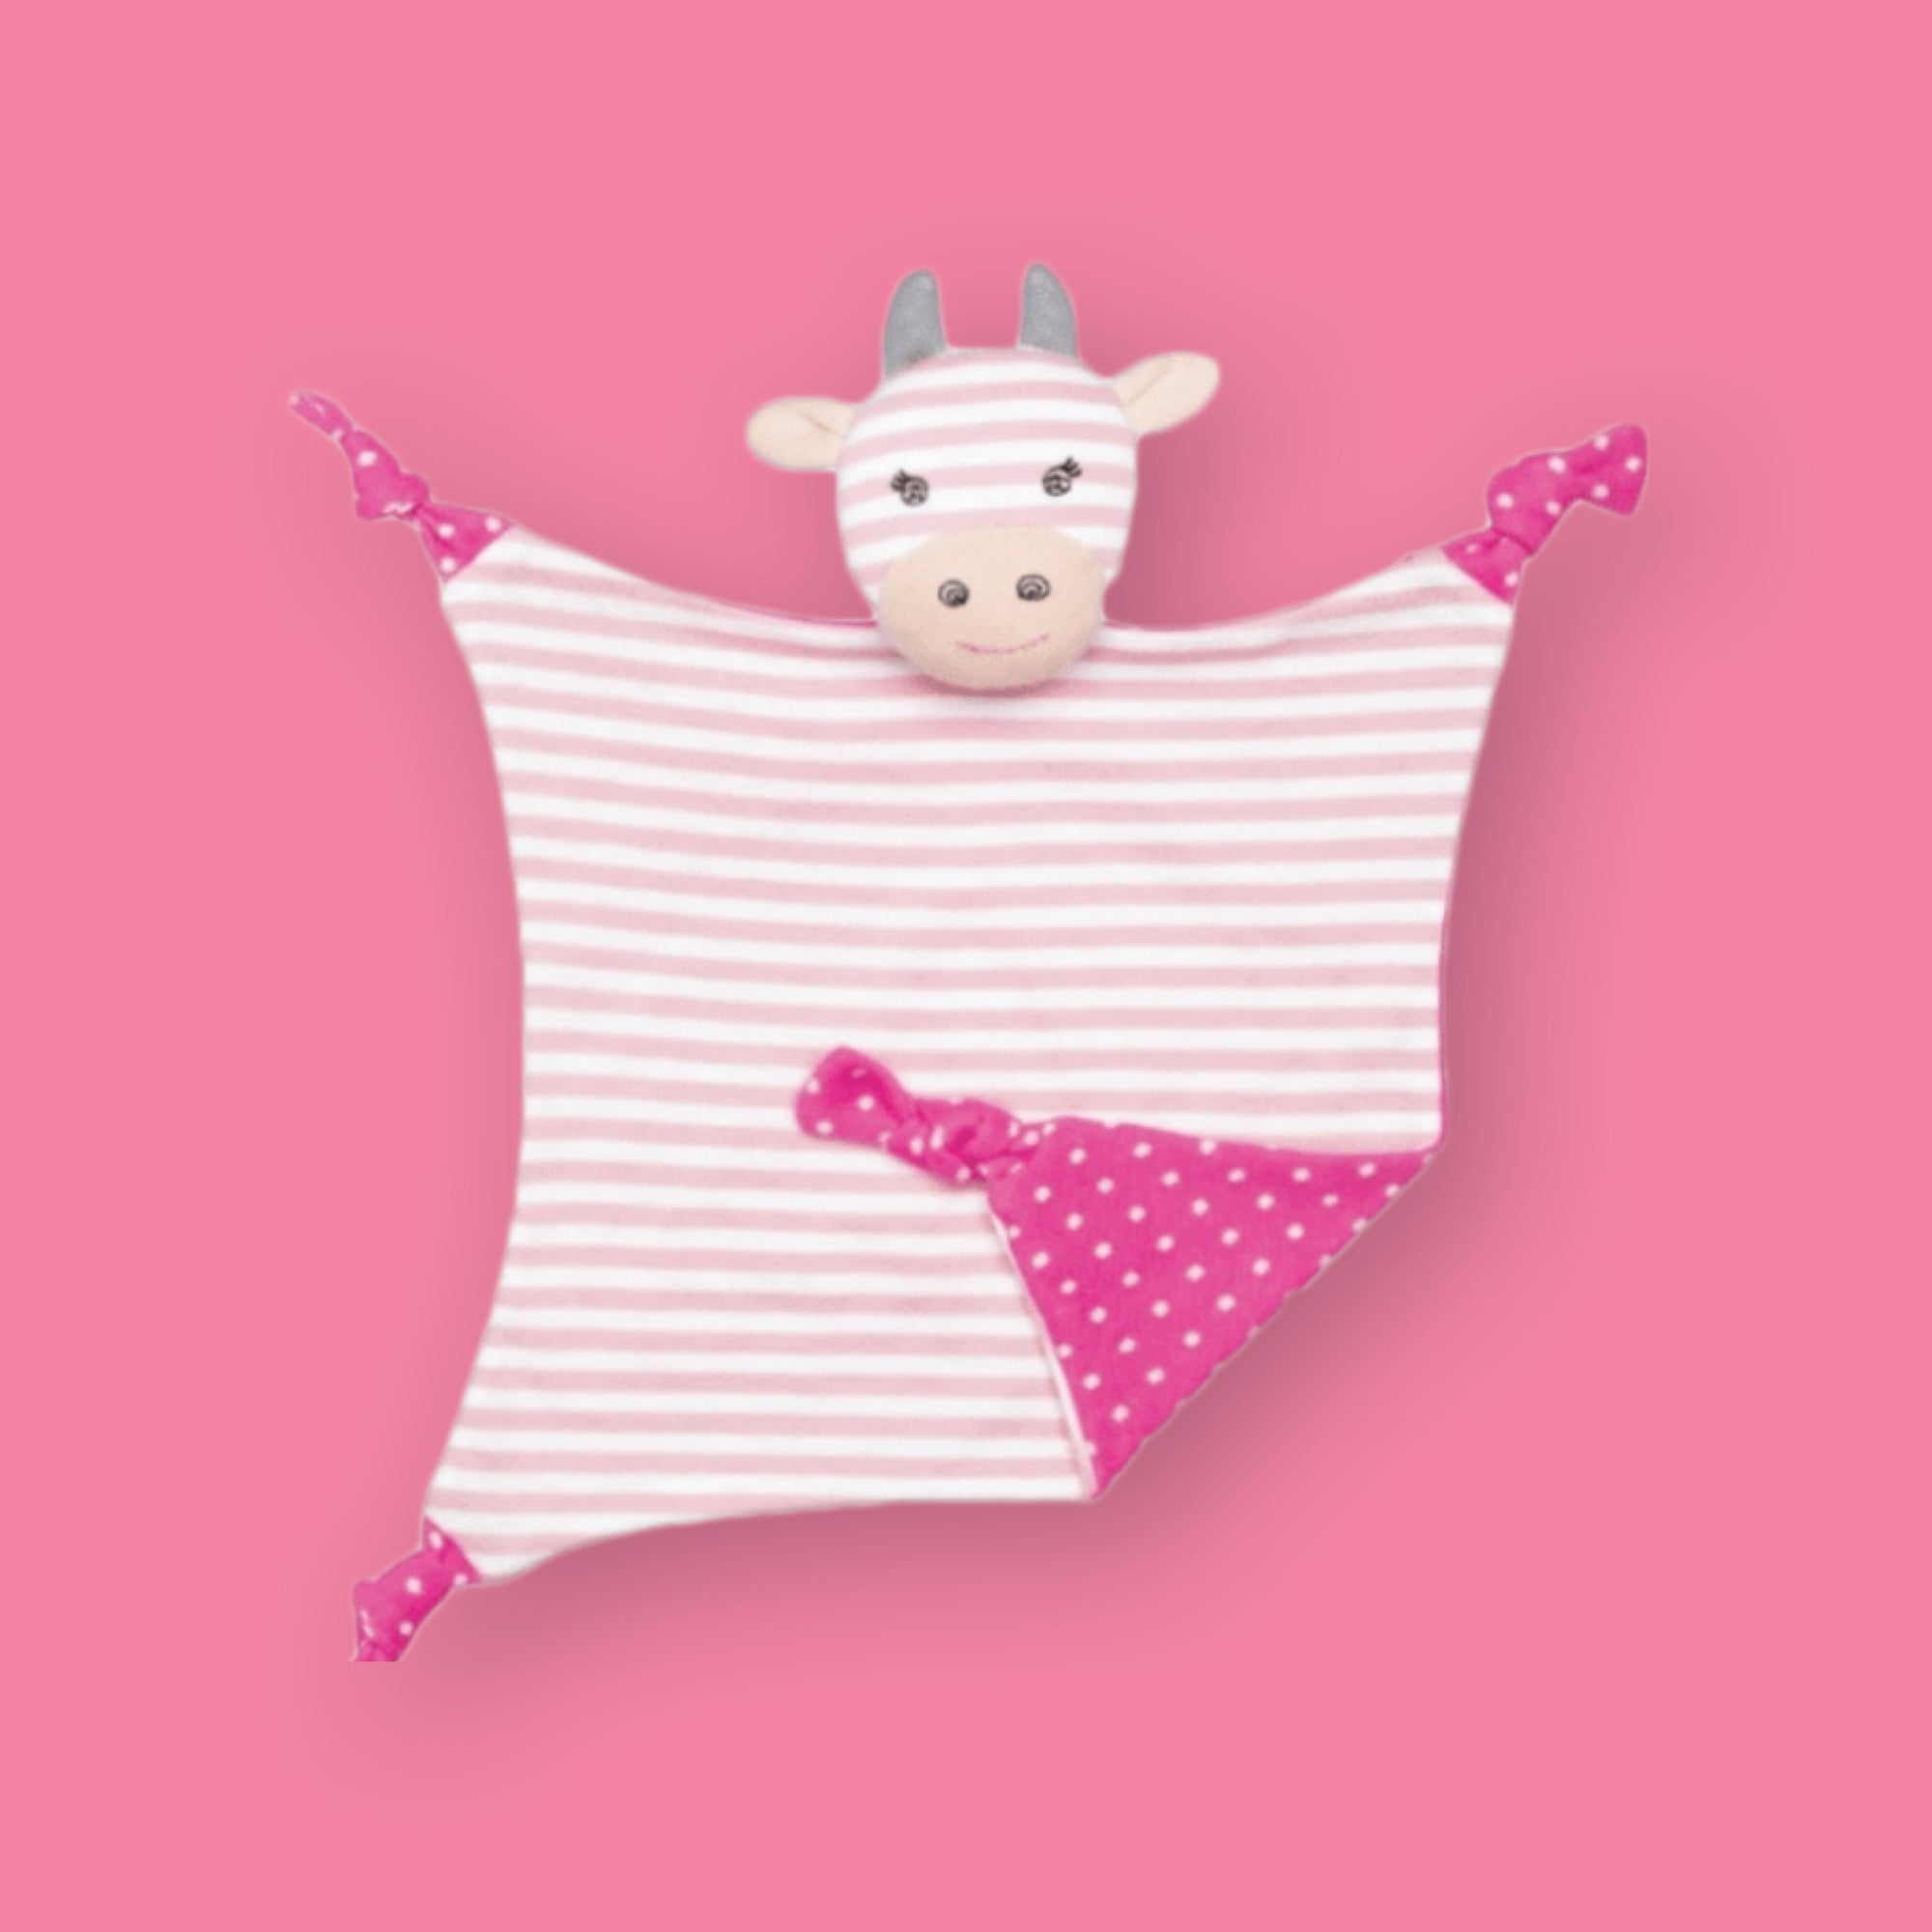 On a bubblegum pink background sits an Organic Farm Buddy pink striped cuddly cow for newborns. It has light pink and white stripes on the front and on the back is hot pink with white polka dots. 